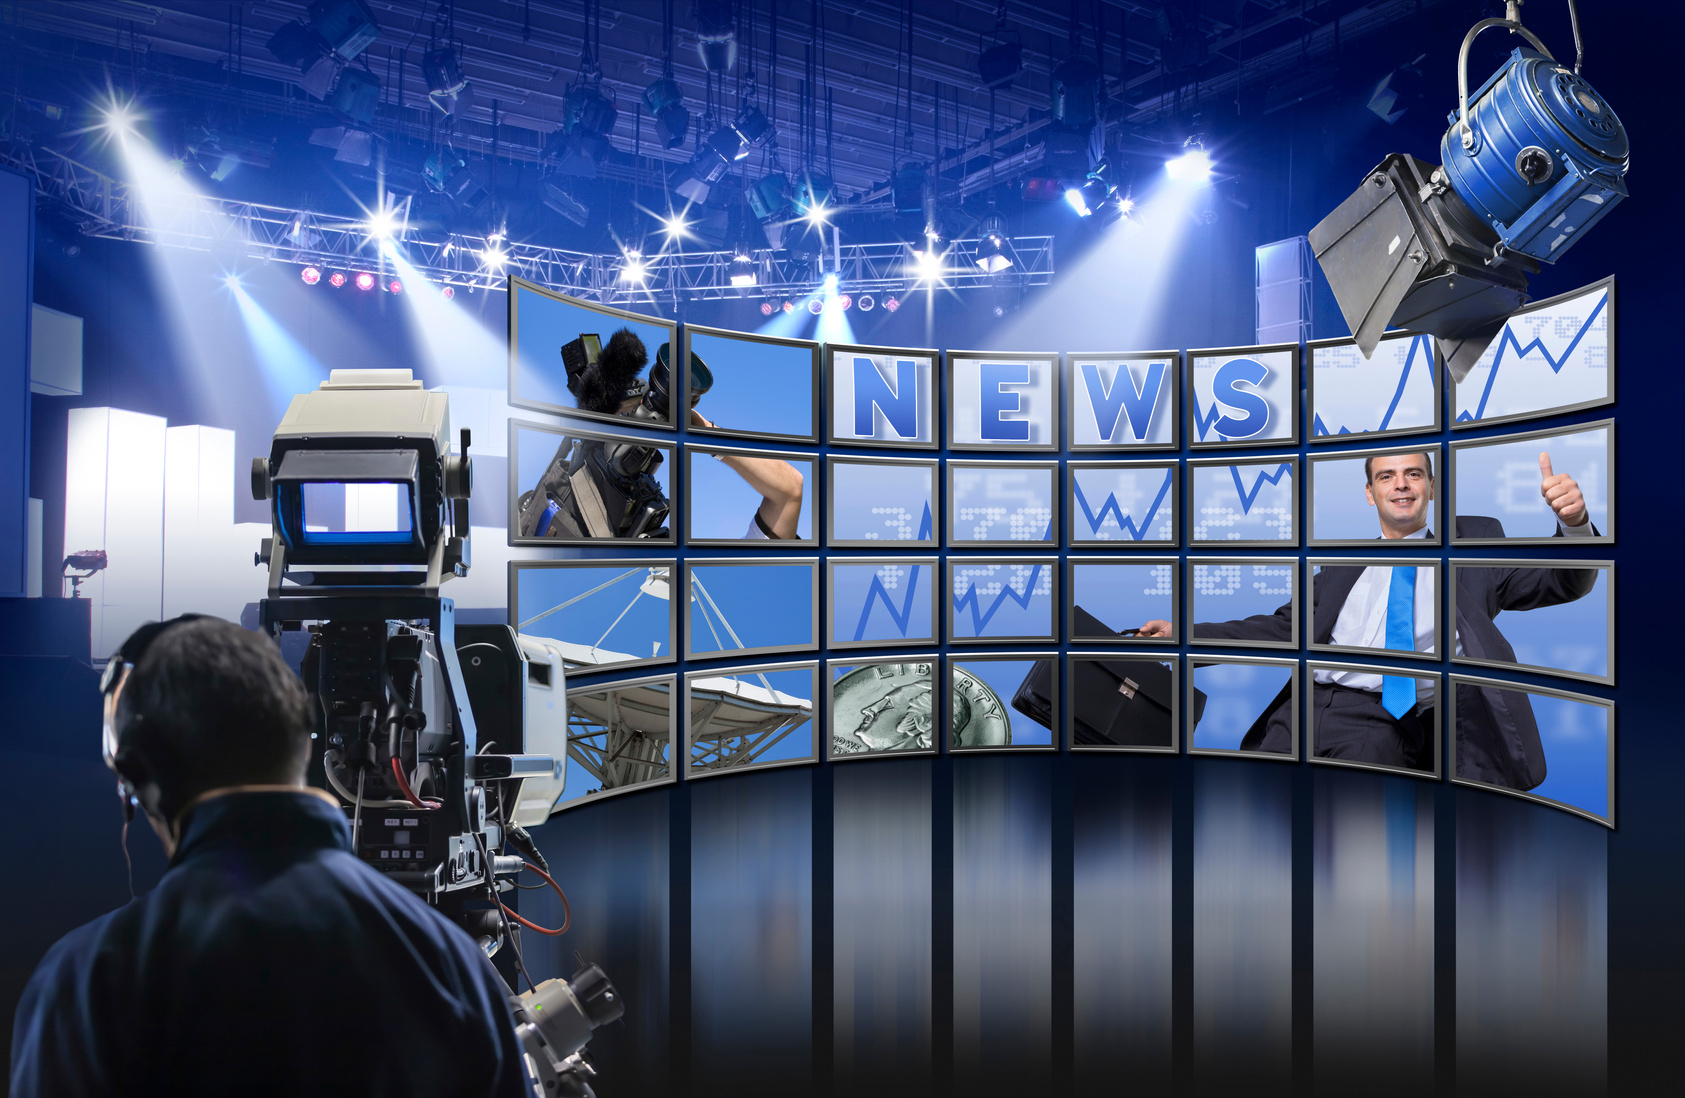 Video wall with TV Screens showing News in Studio broadcasting